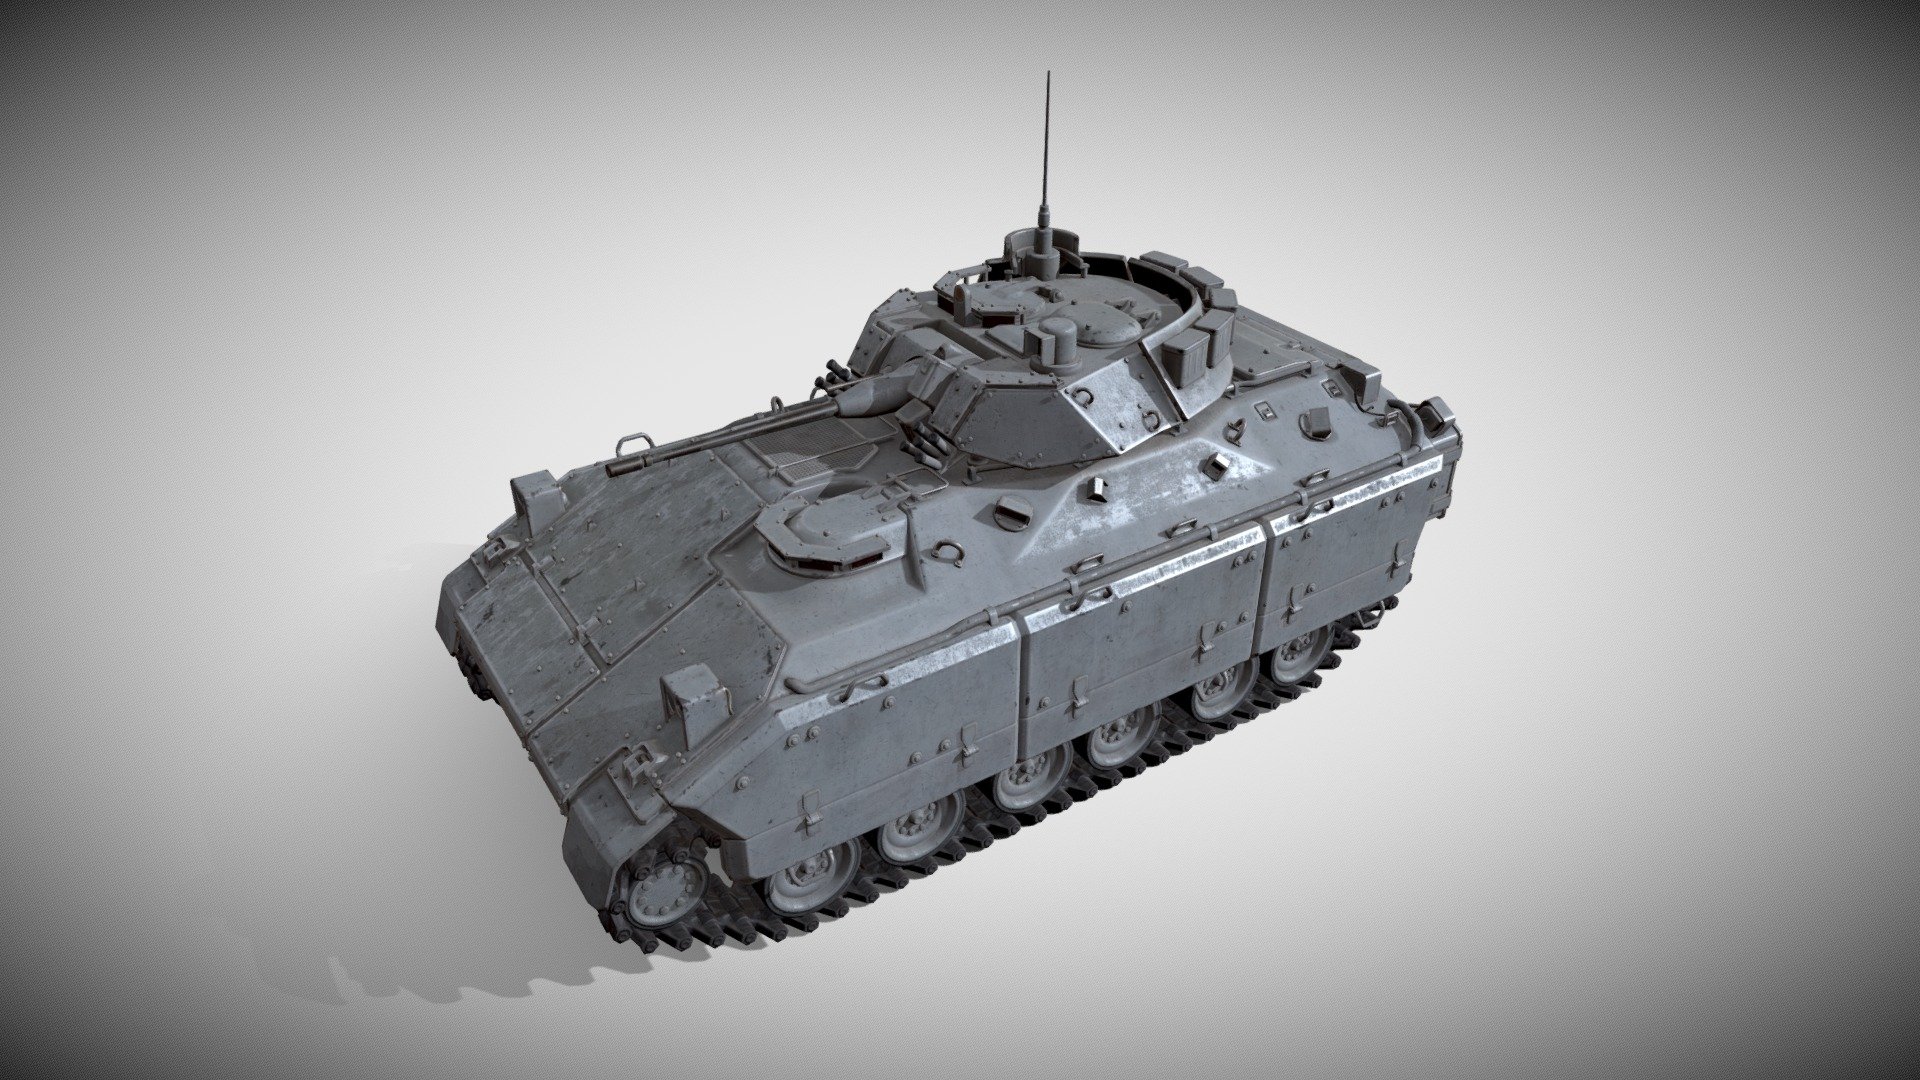 A PBR textured model of APC (Armoured personnel carrier).
- Rear hatch can be opened. Has interior for the troops compartment (in the rear).
- Turret, rear hatch, gun, visor are separate meshes and can be animated.
- Game ready.
- 2 materials
- 2 sets of PBR textures (base color, metalness, normal map, roughness, ambient occlusion, opacity)
- 4K textures for the body. 1K textures for glass (transparent) elements 3d model